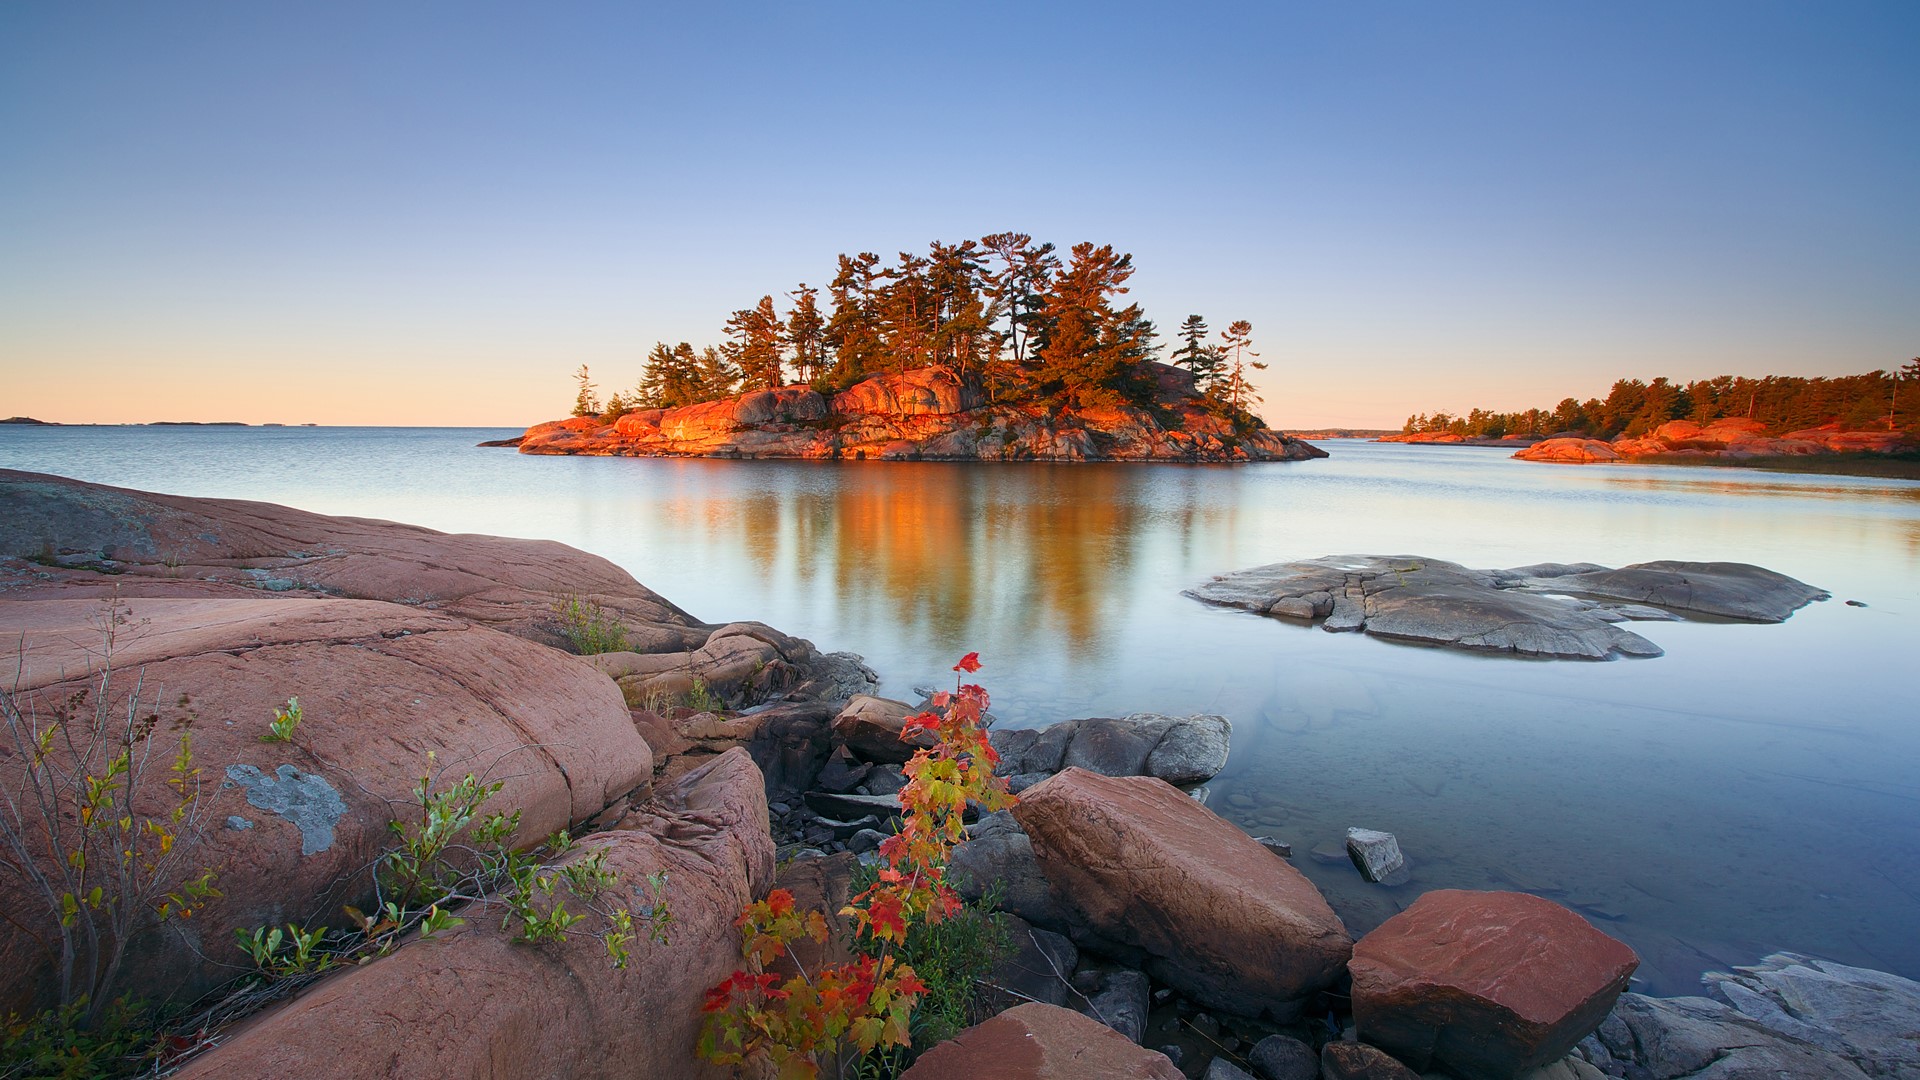 General 1920x1080 nature landscape rocks clear sky plants water trees sunrise Ontario Canada